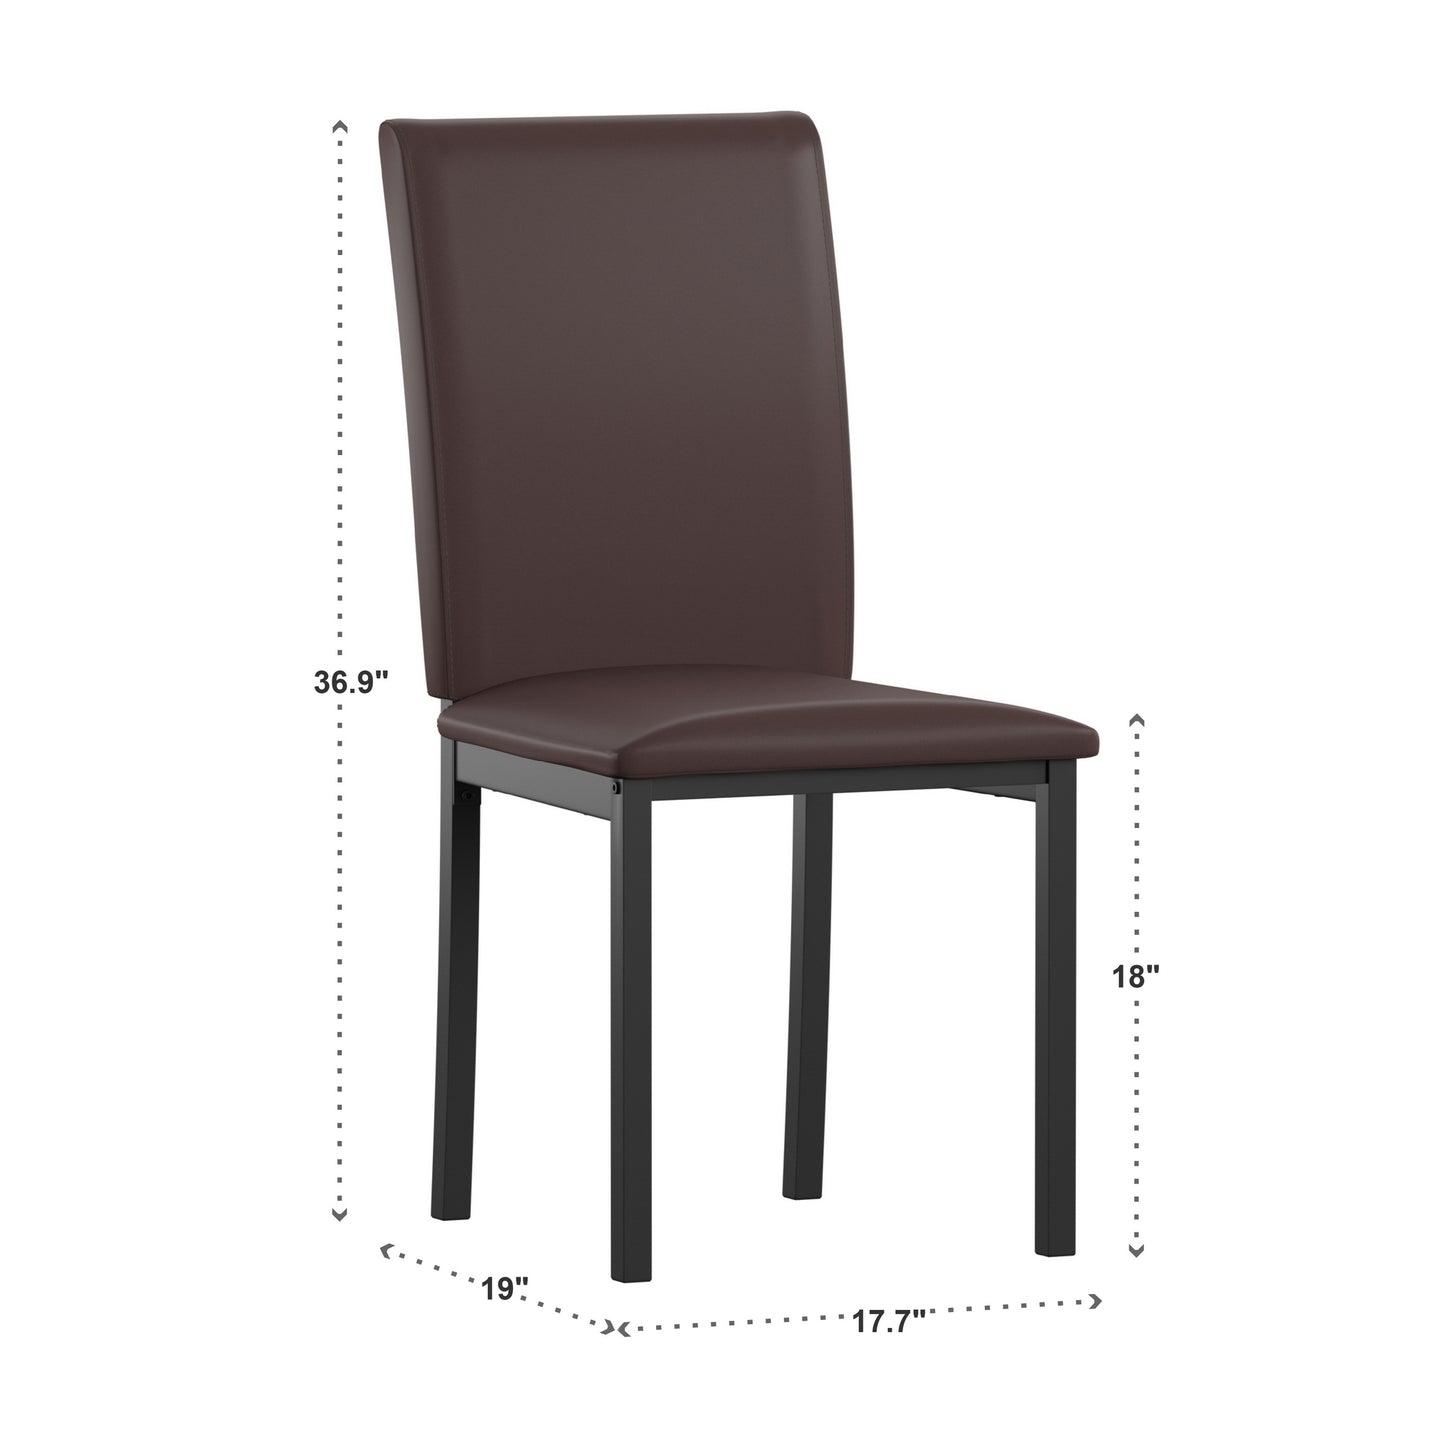 Metal Upholstered Dining Chairs - Brown Faux Leather, Set of 4